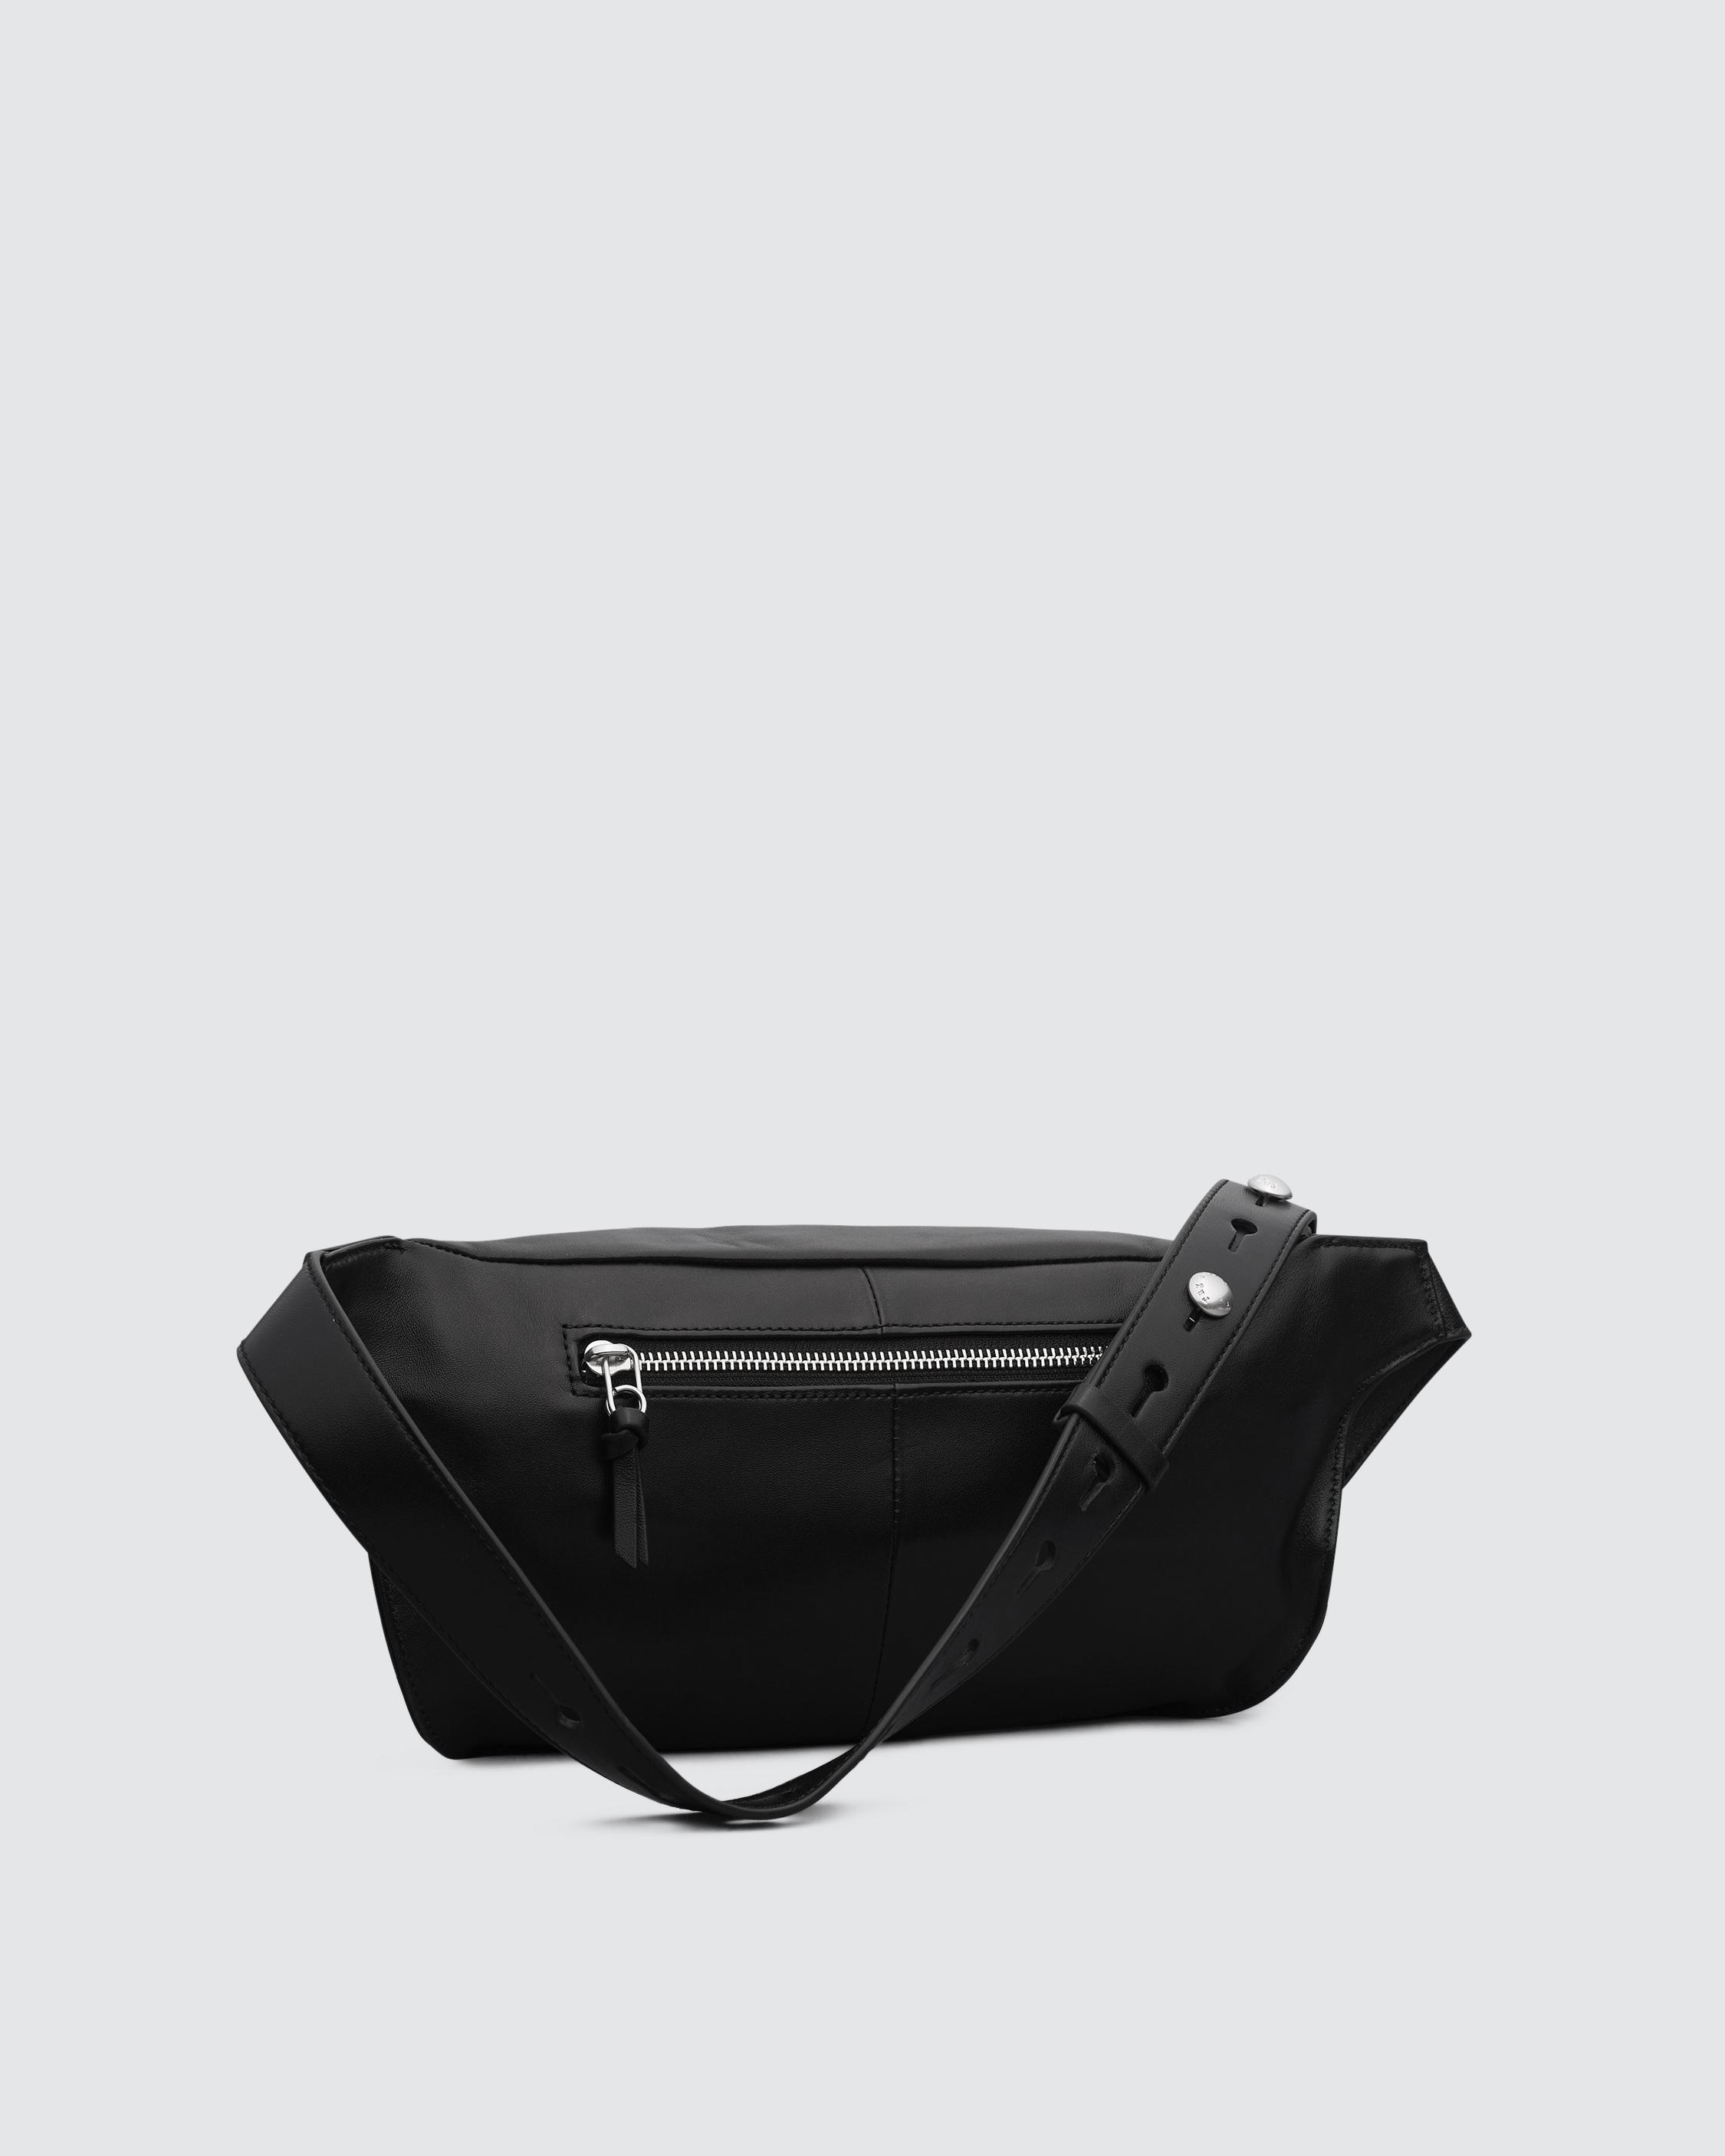 Commuter Fanny Pack - Leather
Small Fanny Pack - 3